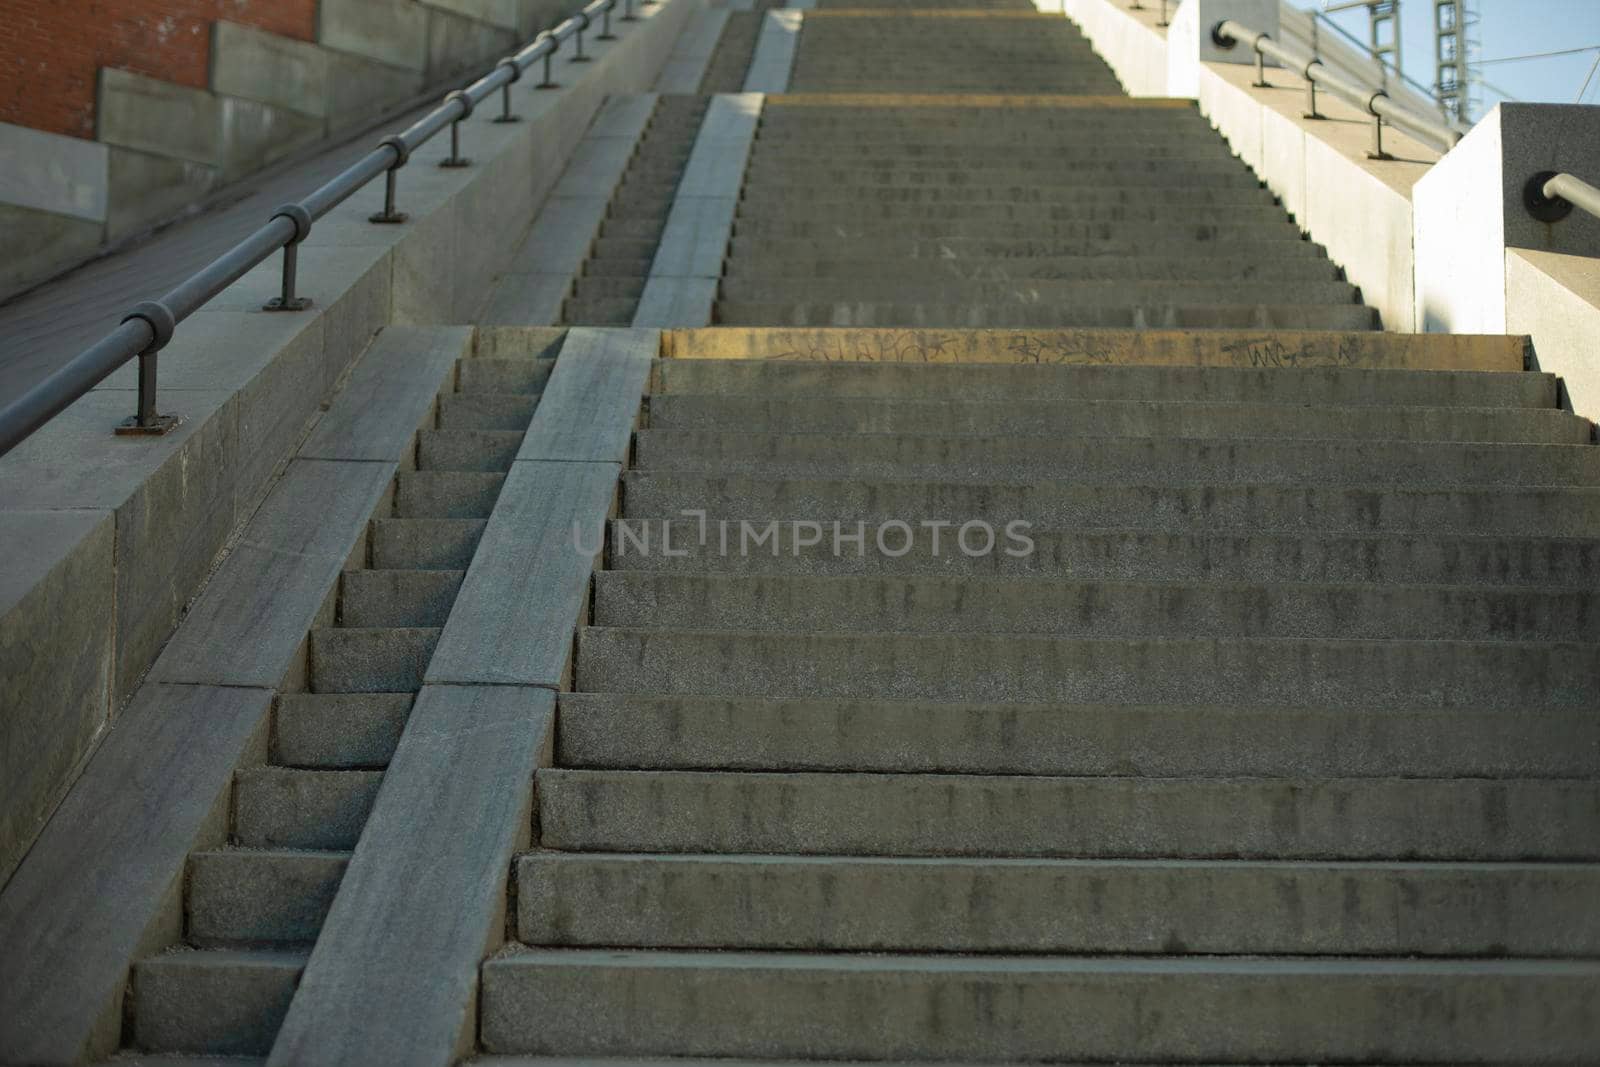 Long staircase up. Architecture details. Steps and ramp for lifting stroller.